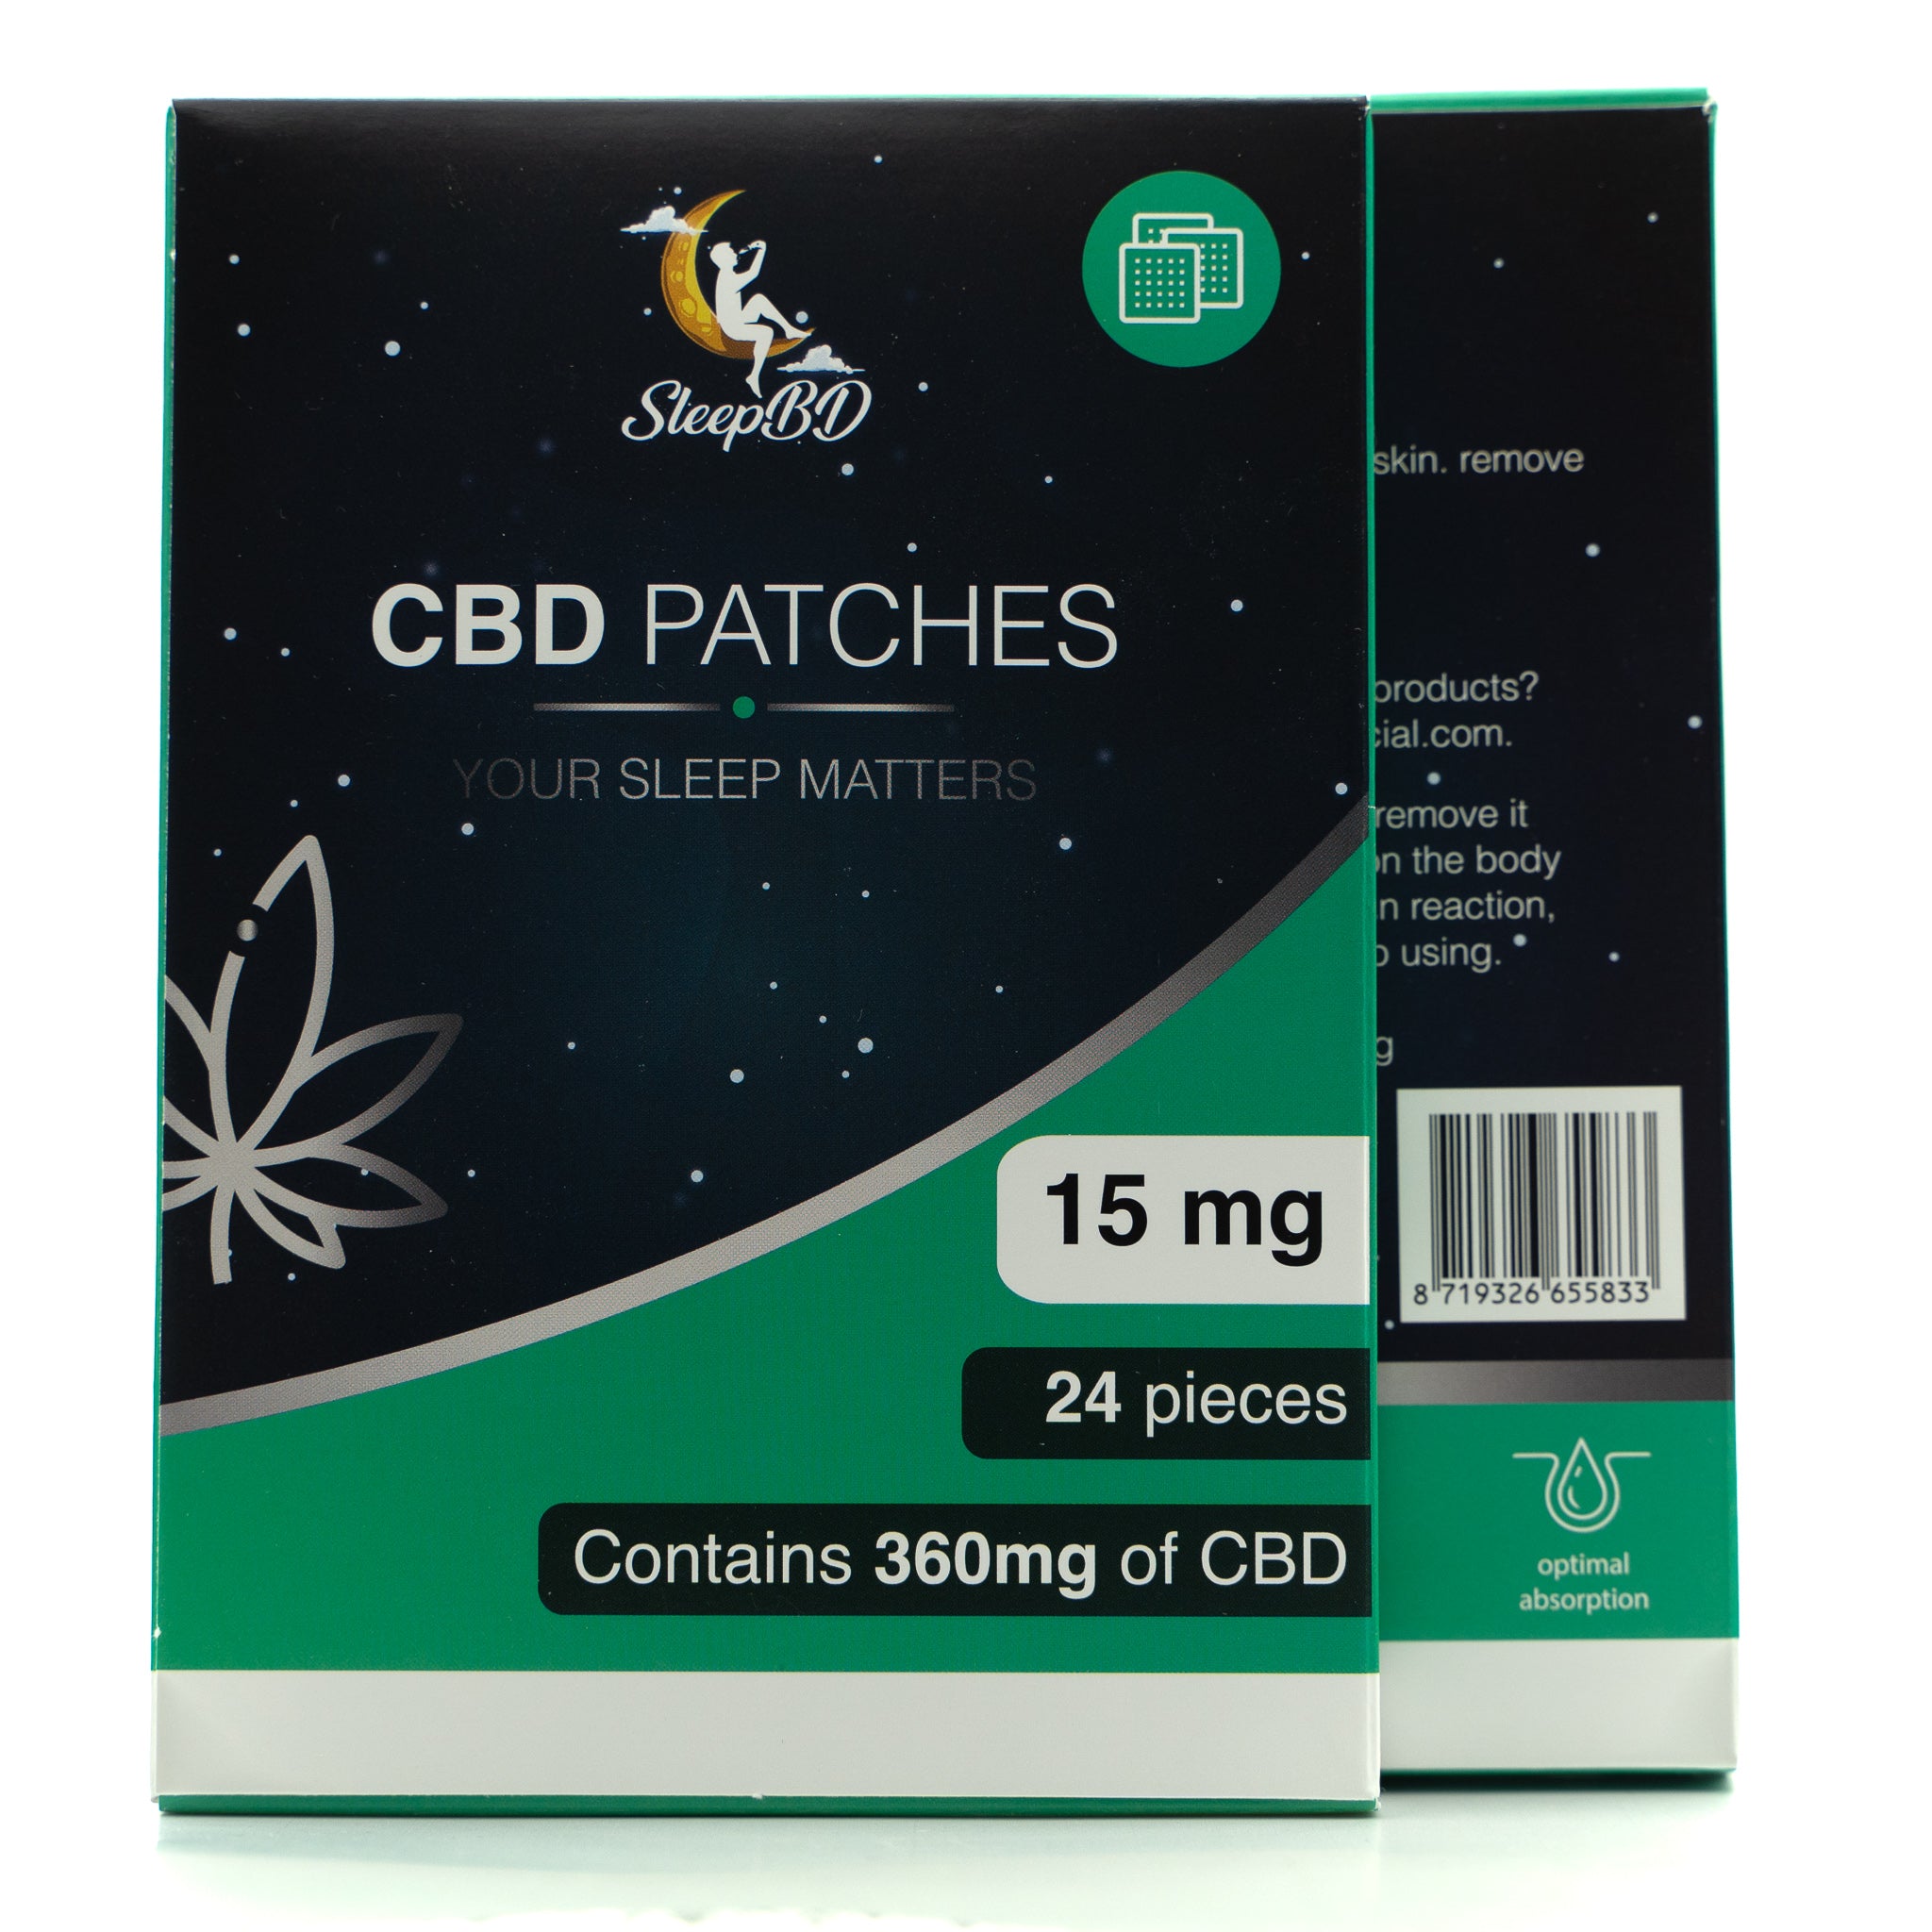 CBD patches for sleep – 24pieces x 15mg (360mg)